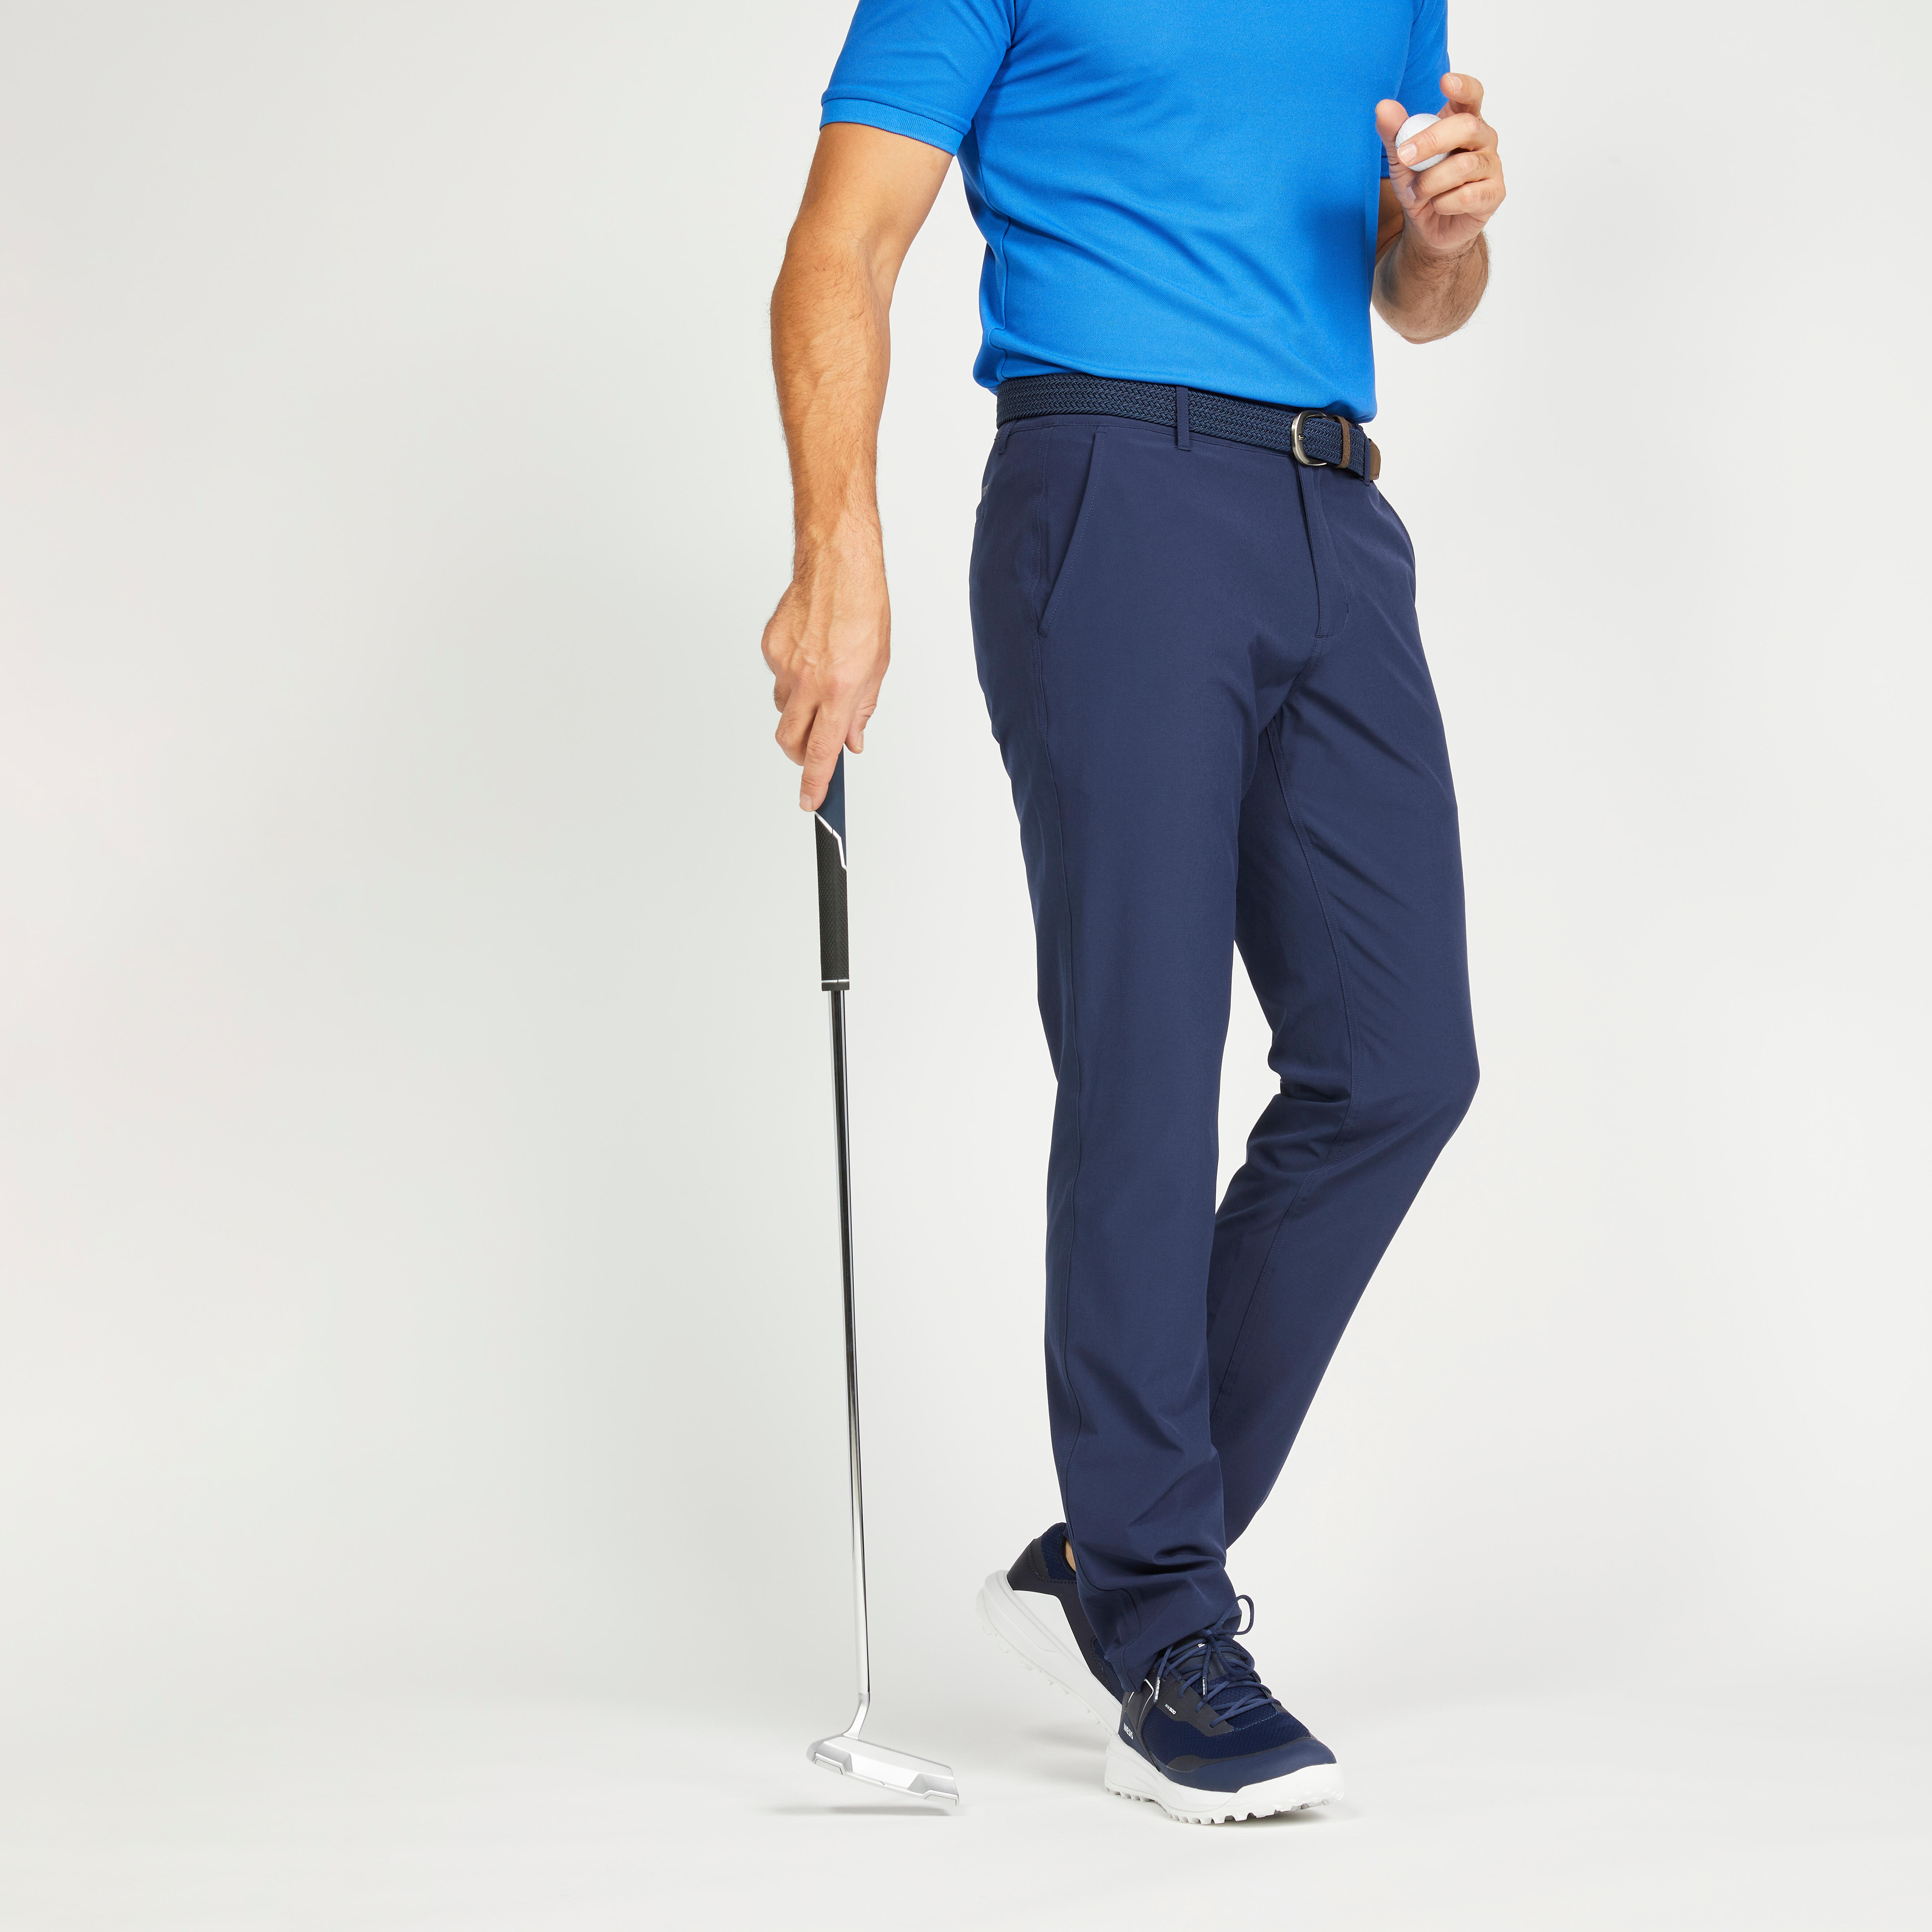 Puma 101 Men's Golf Pants (US Size) - Asiansports.in - 9903072000